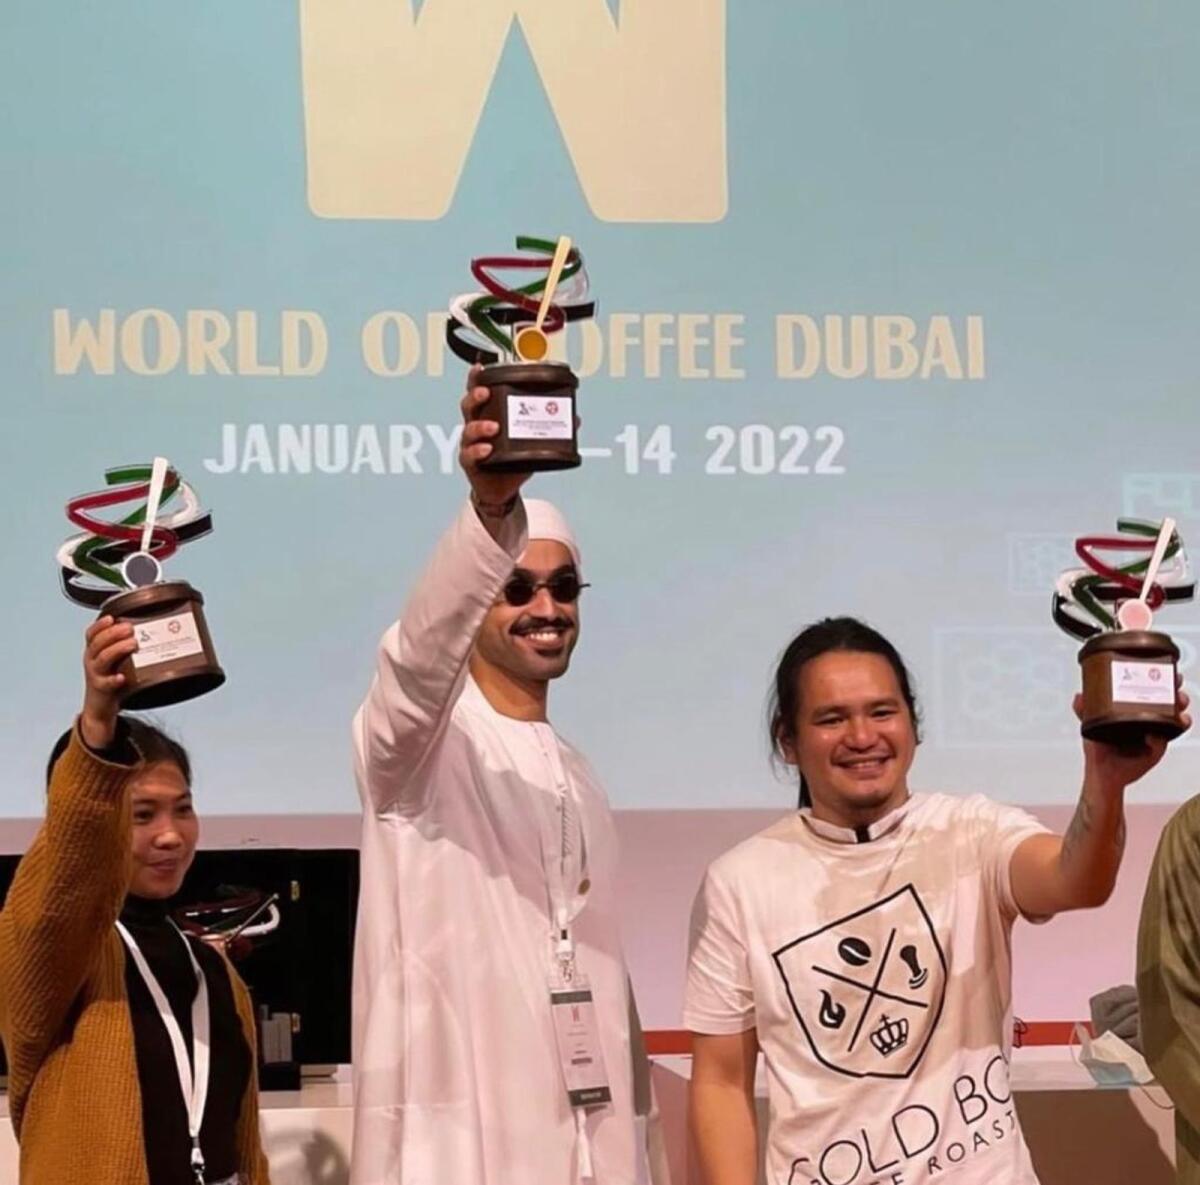 Suleiman with his award at last year’s World of Coffee (Supplied photo)